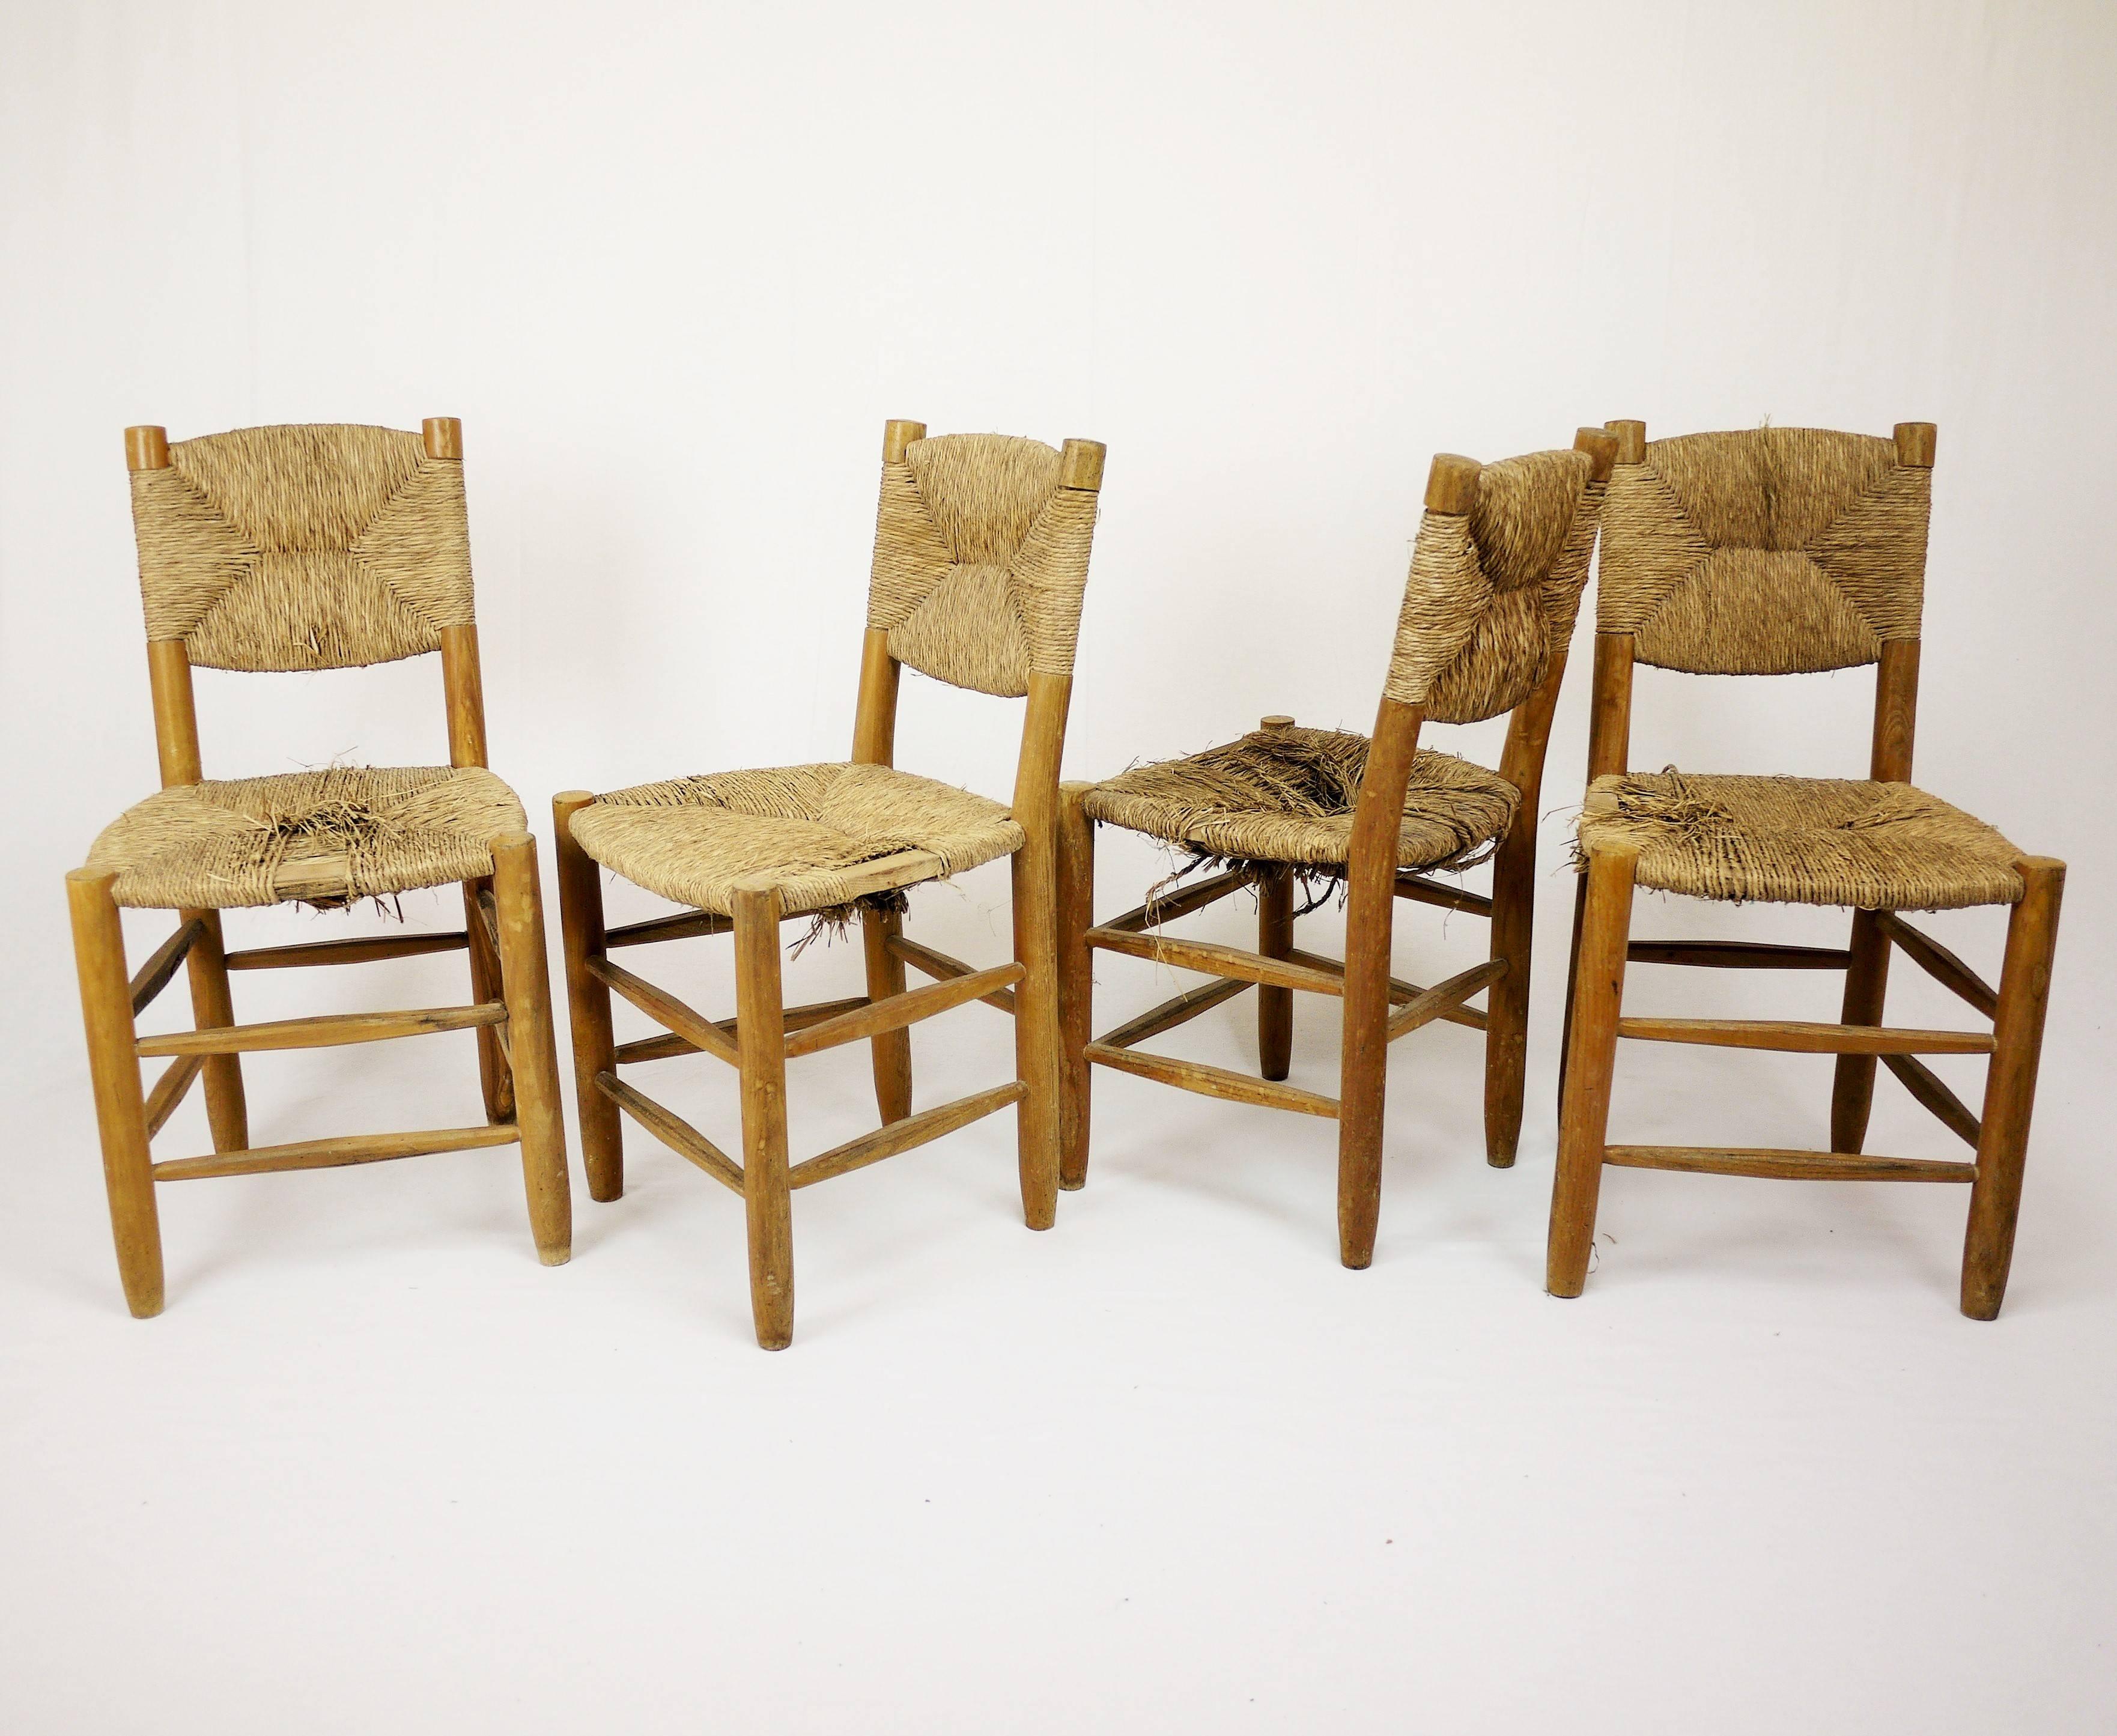 Set of four rush chairs, model 19 edited by George Blanchon for BCB in 1951. Ash structure, original rush to restore. 
(Rush restoration job can be done in France for 1500 extra euros).